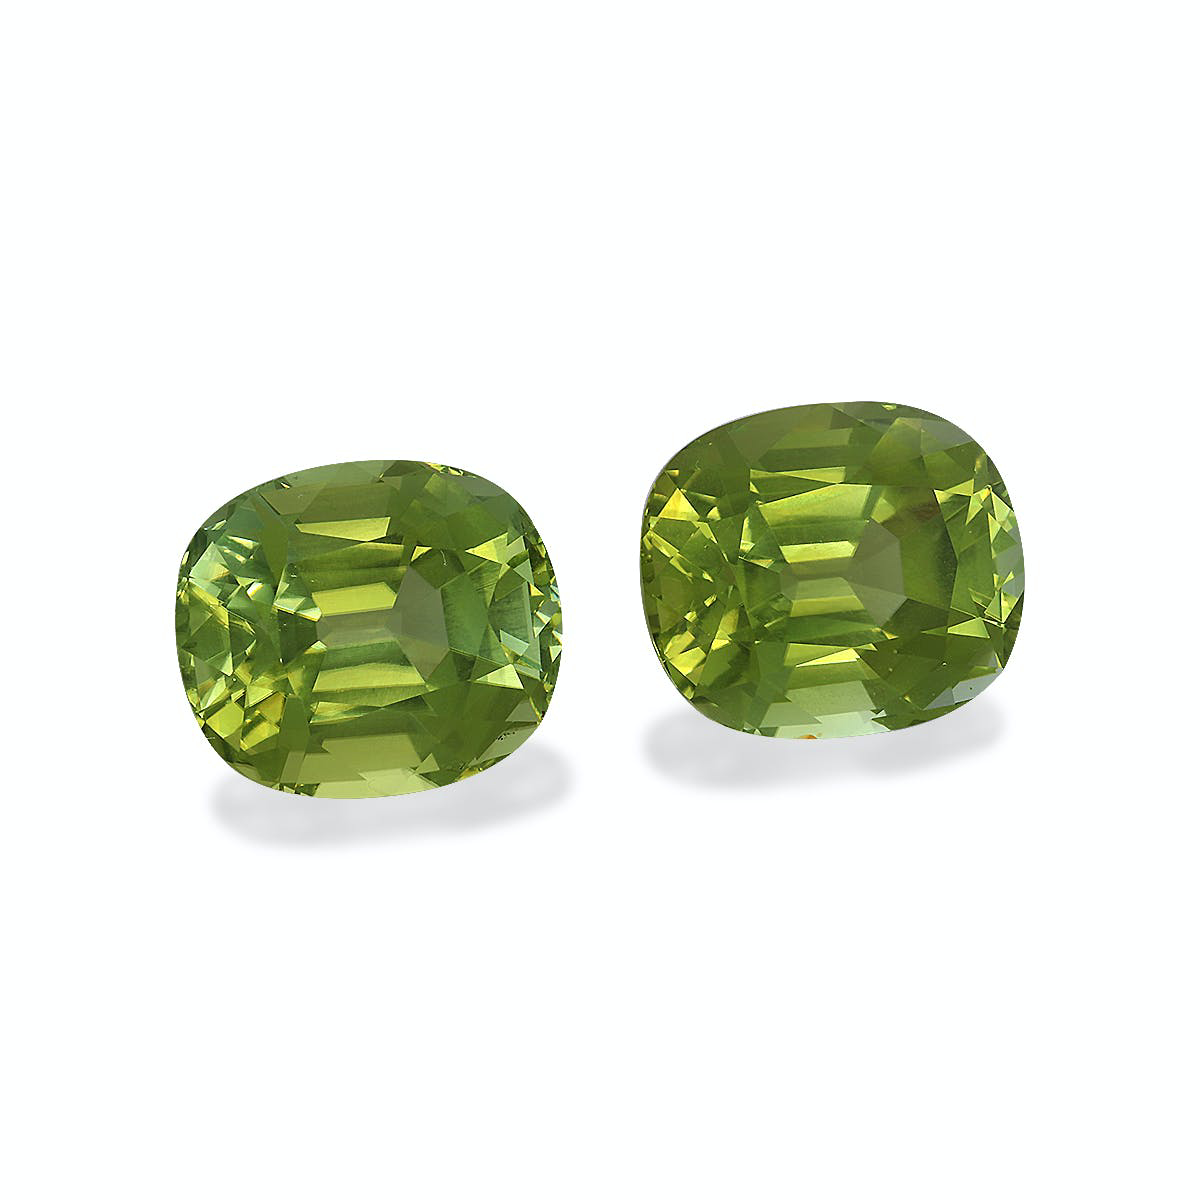 Picture of Lime Green Cuprian Tourmaline 26.70ct - 15x13mm Pair (MZ0245)